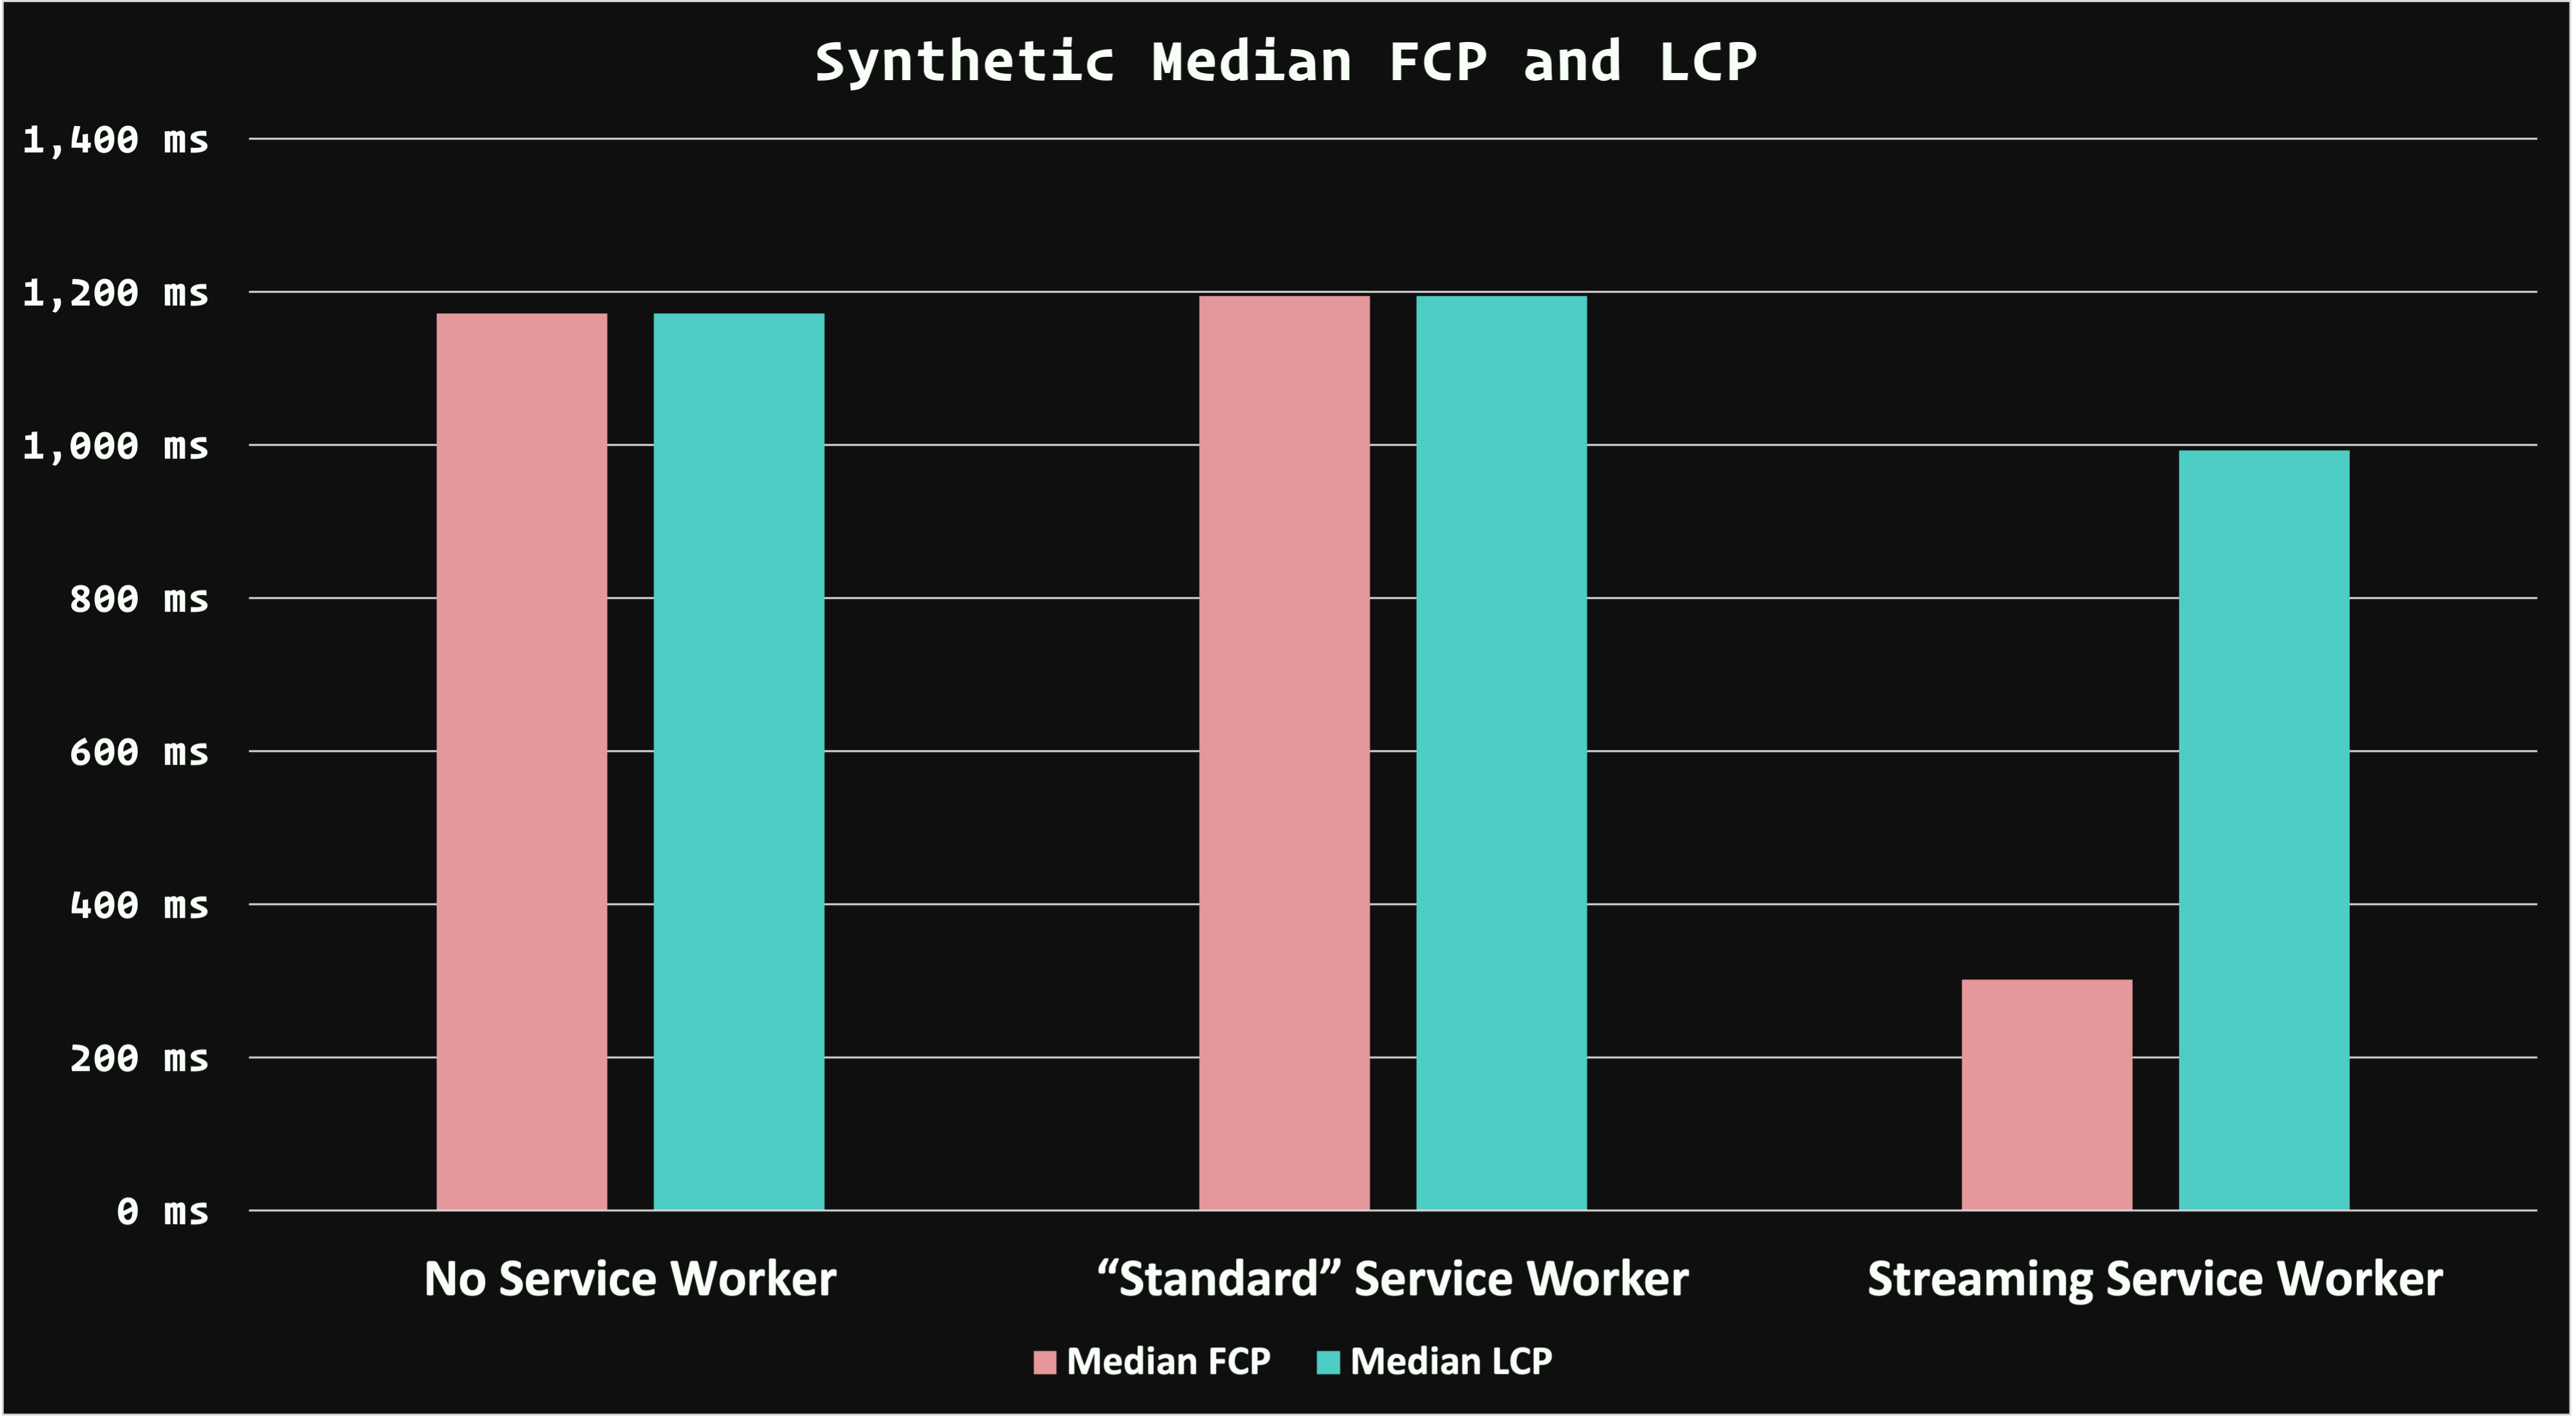 A bar graph comparing First Contentful Paint and Largest Contentful Paint performance for the Weekly Timber website for scenarios in which there is no service worker, a "standard" service worker, and a streaming service worker that stitches together content partials from CacheStorage and the network. The first two scenarios are basically the same, while the streaming service worker delivers measurably better performance for both FCP and LCP—especially for FCP!